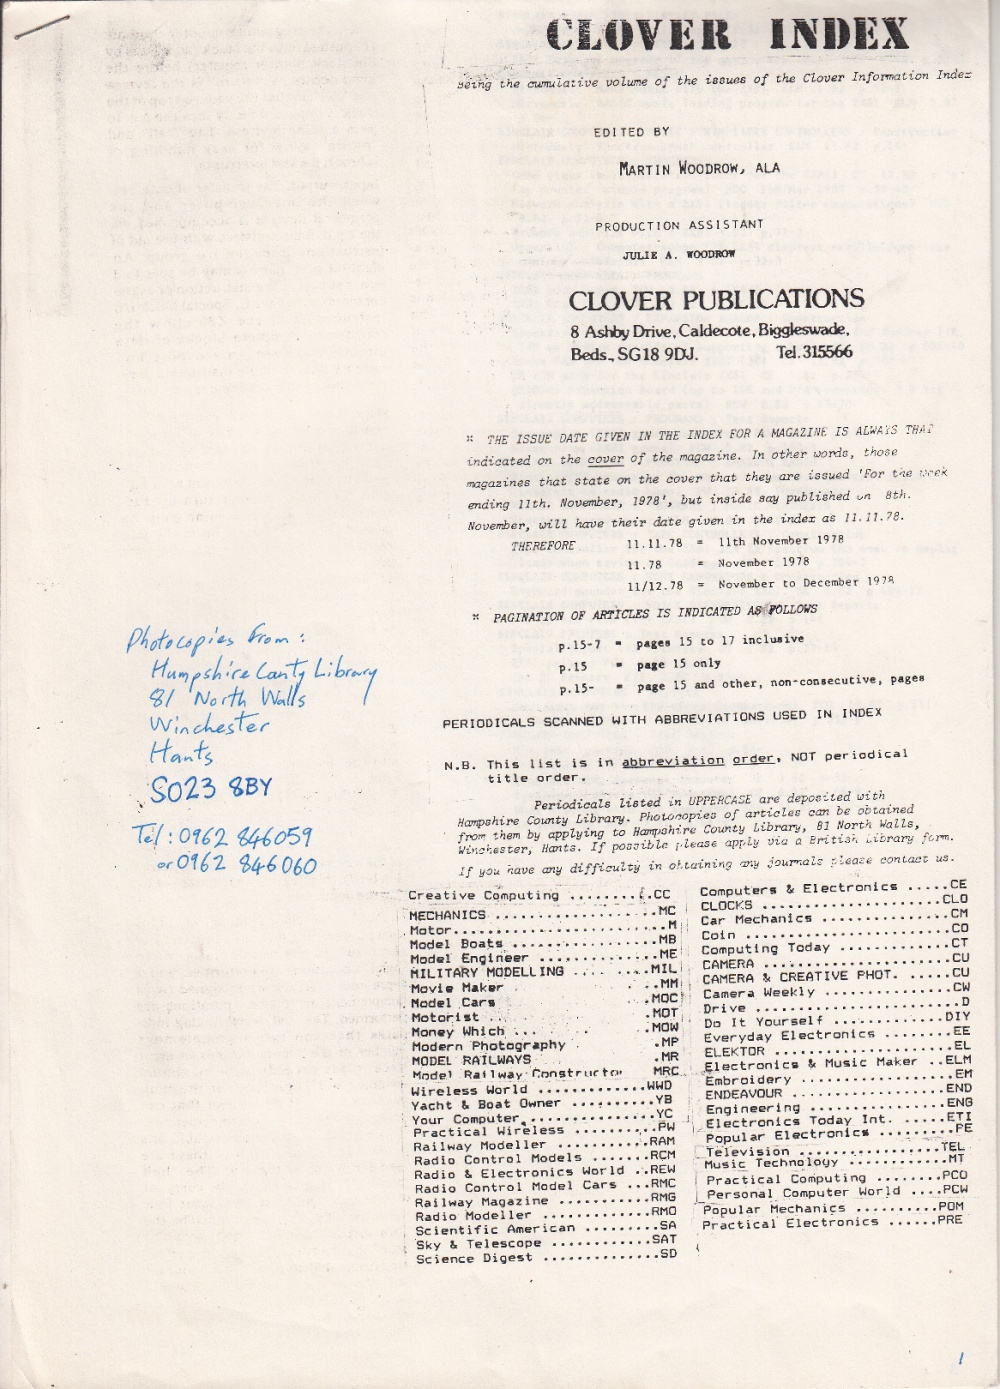 Scan of Document: 'Clover Index' - Index of Sinclair-related Magazine Articles